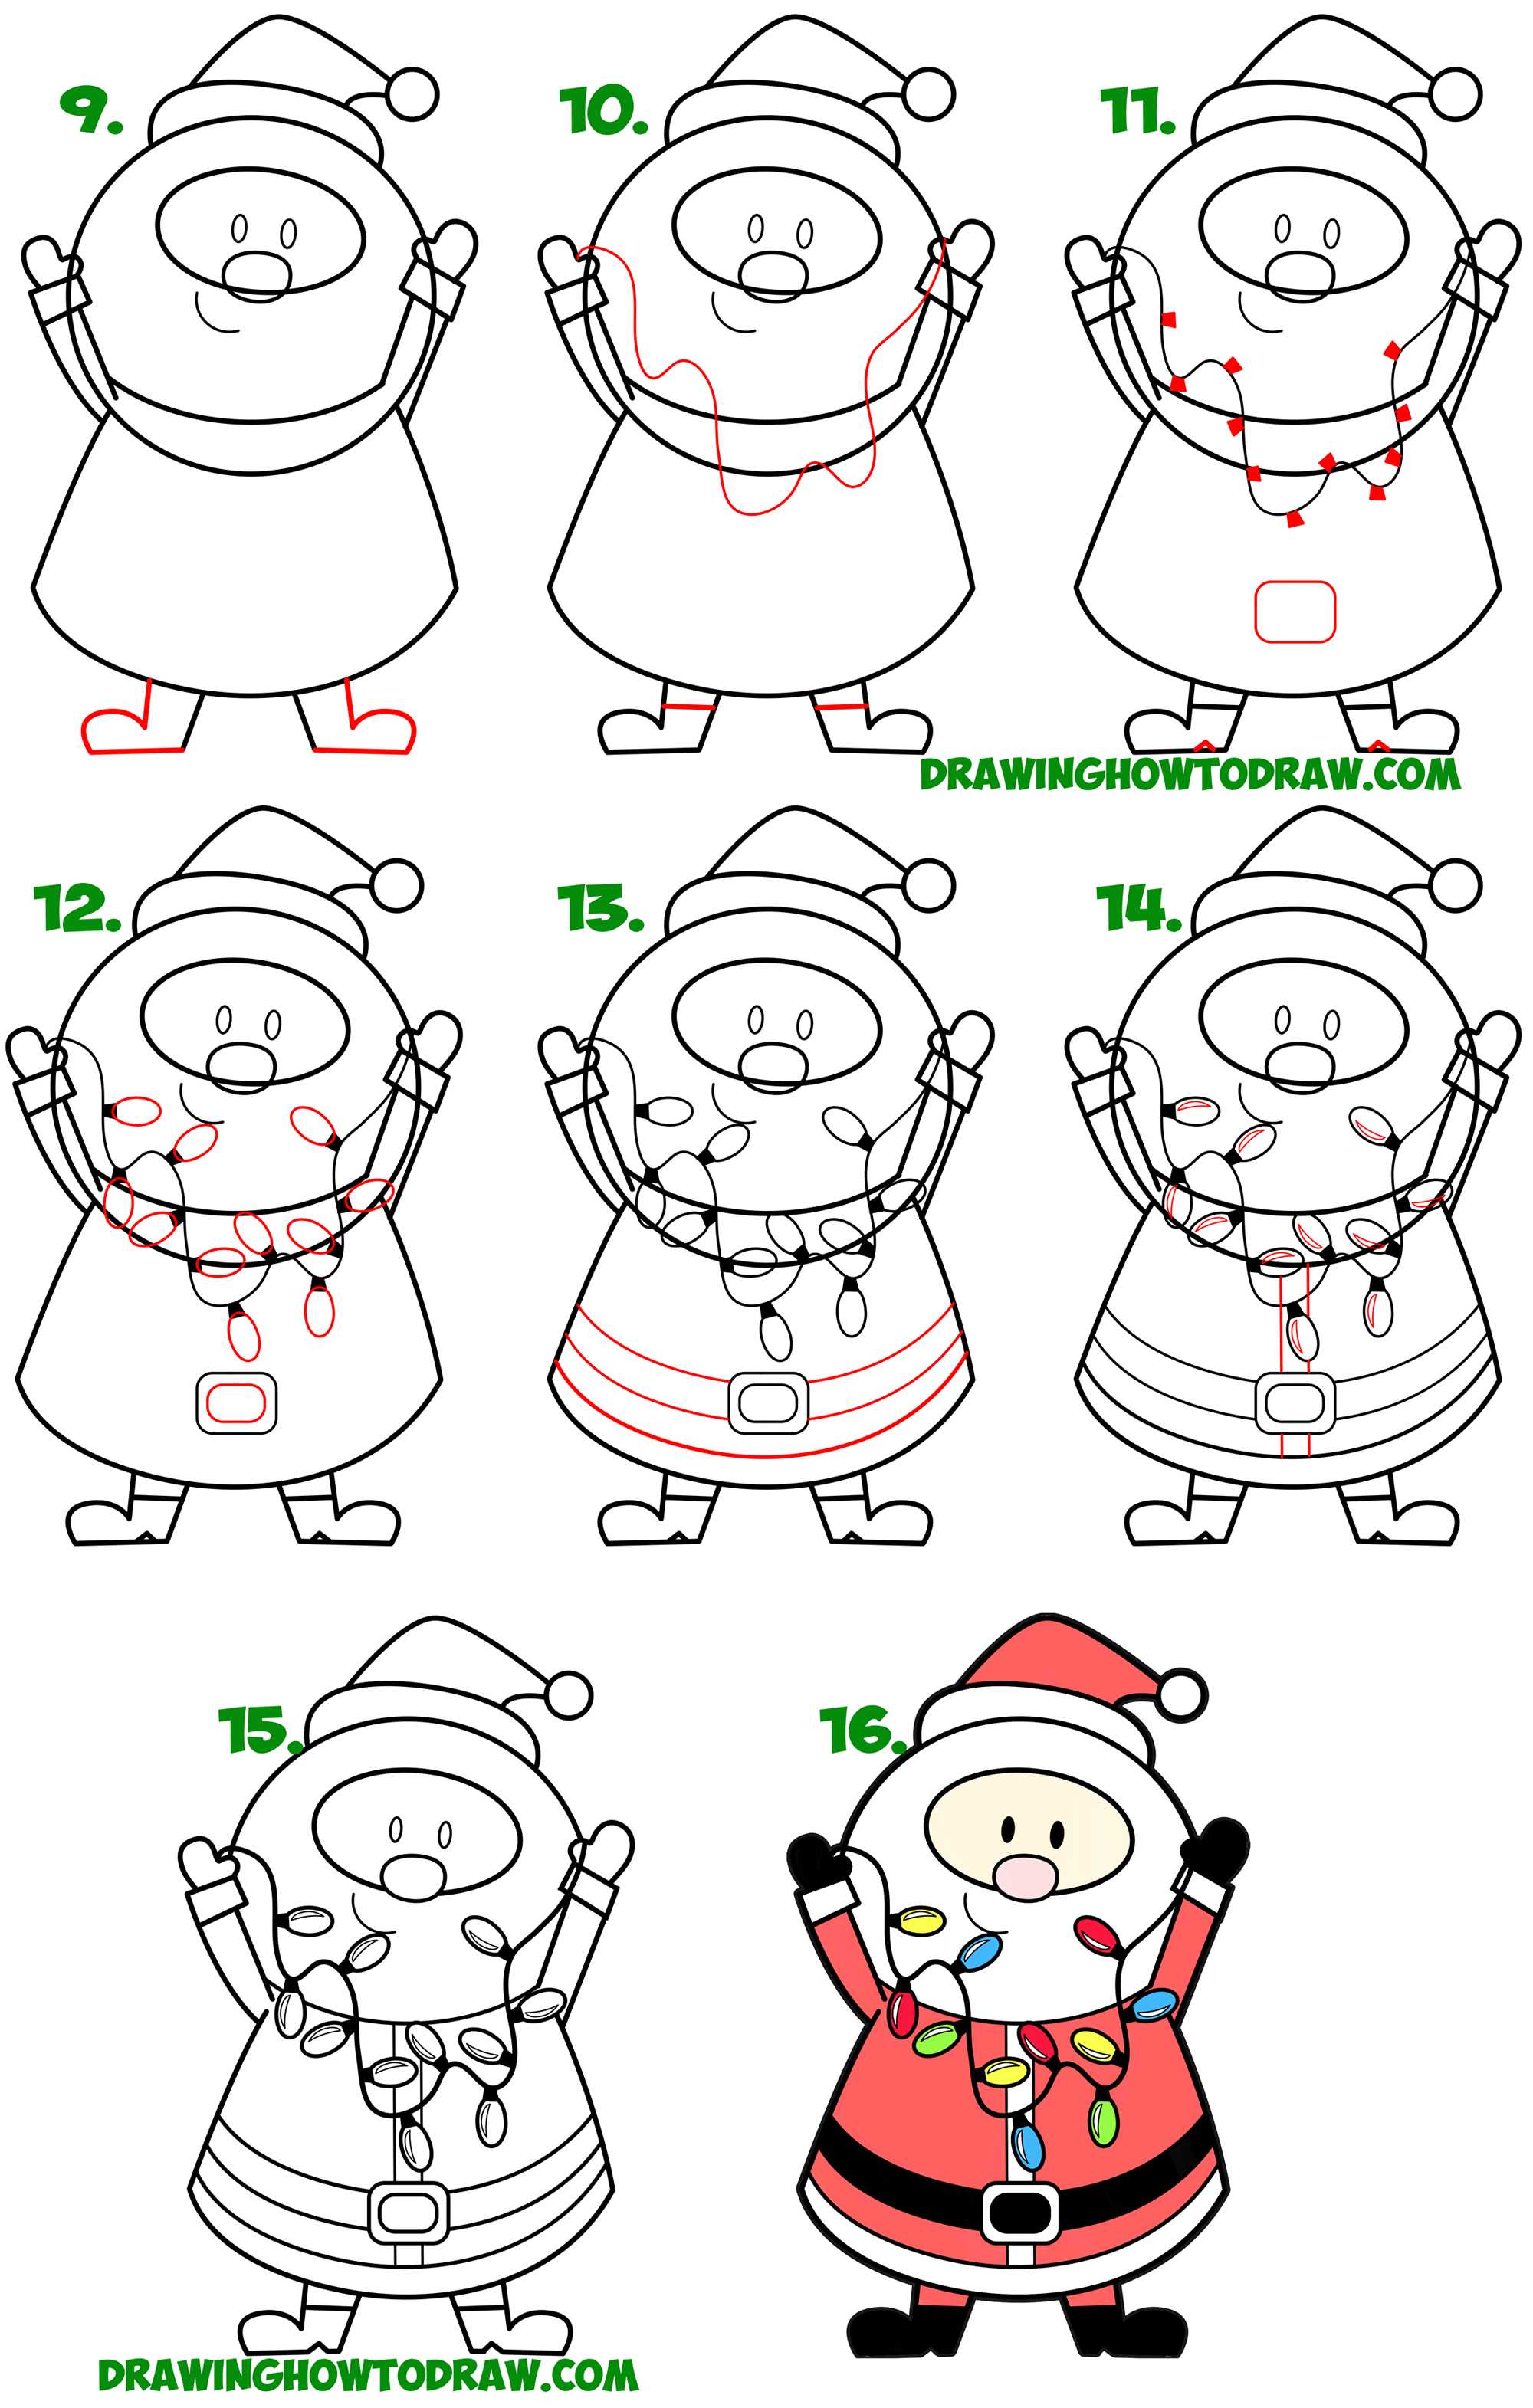 How To Draw Santa Claus Easy Tutorial - Toons Mag